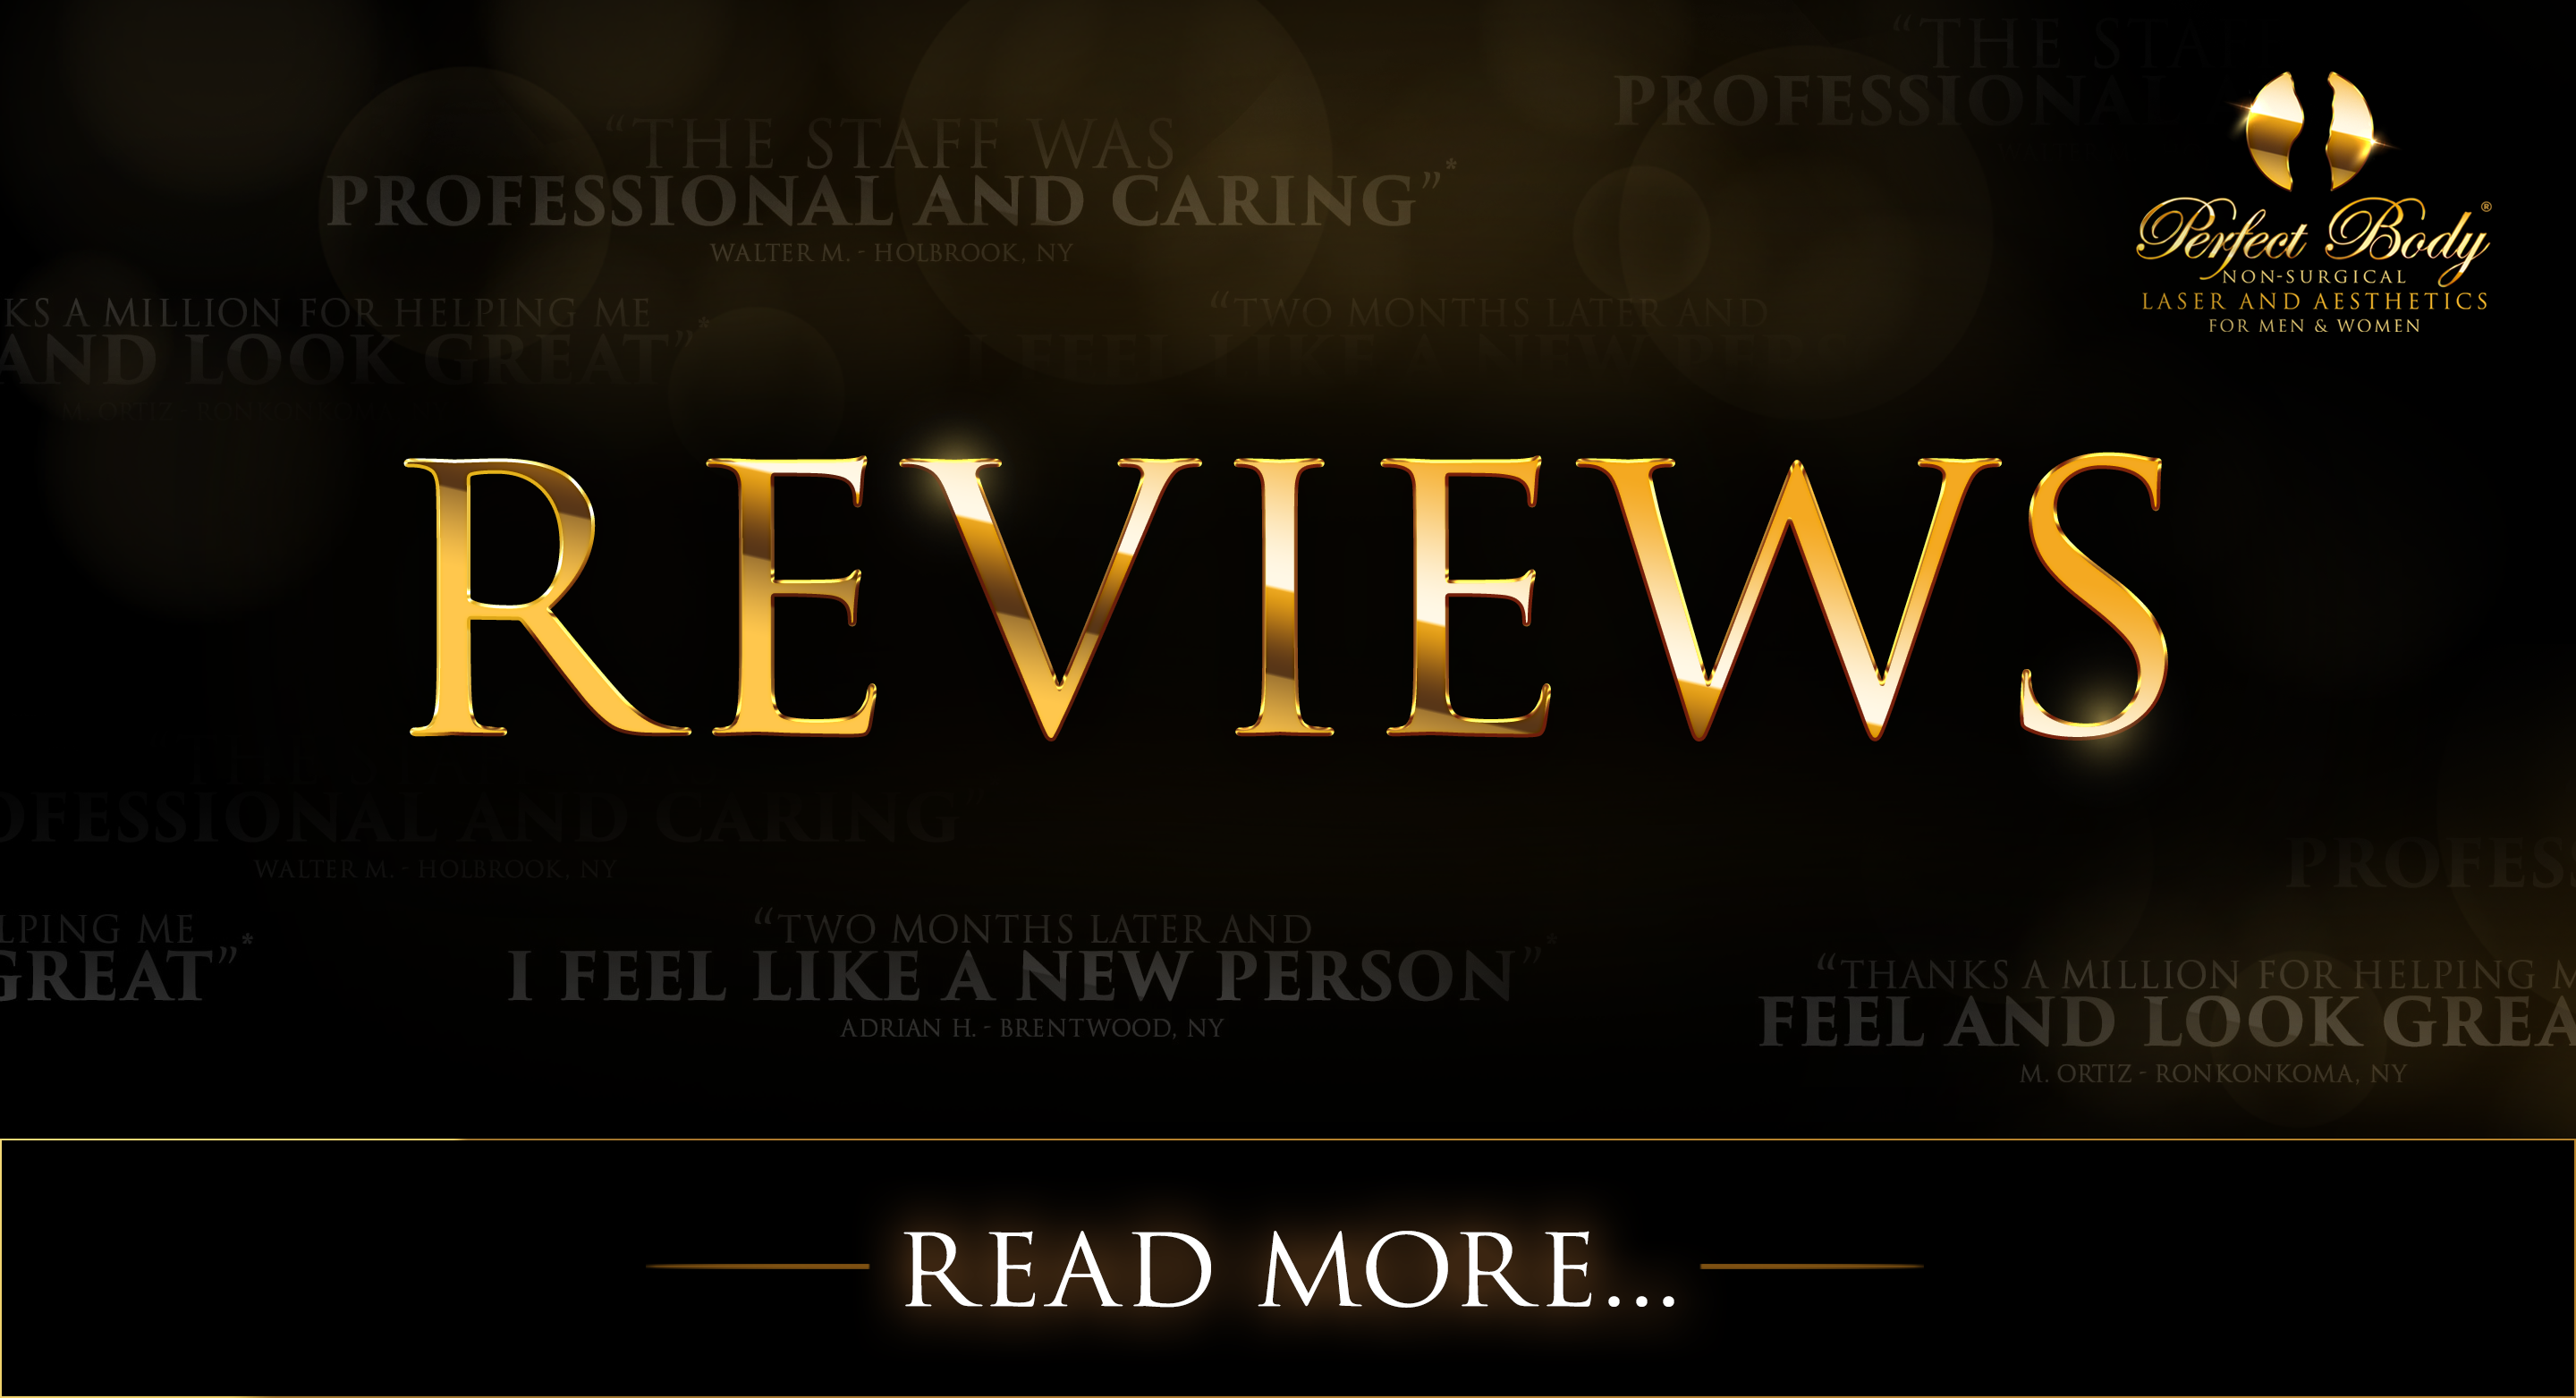 Perfect Body Laser and Aesthetics Reviews